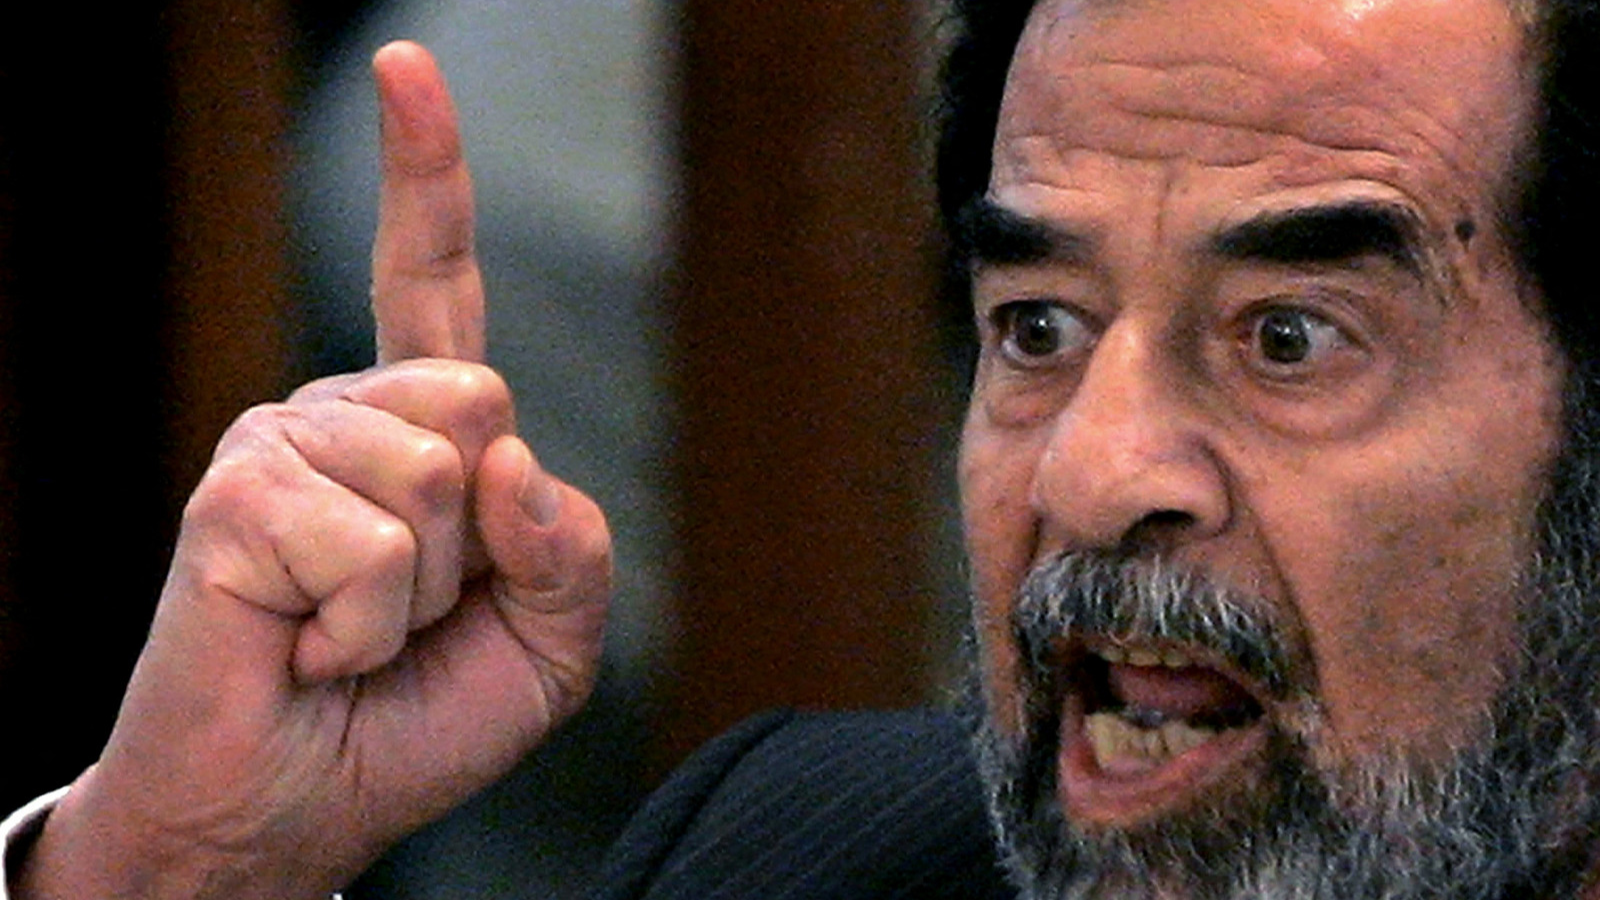 Former Iraqi leader Saddam Hussein addresses the court during his trial for genocide against Kurds. He was eventually sentenced to death by hanging. /Daniel Berehulak/Reuters